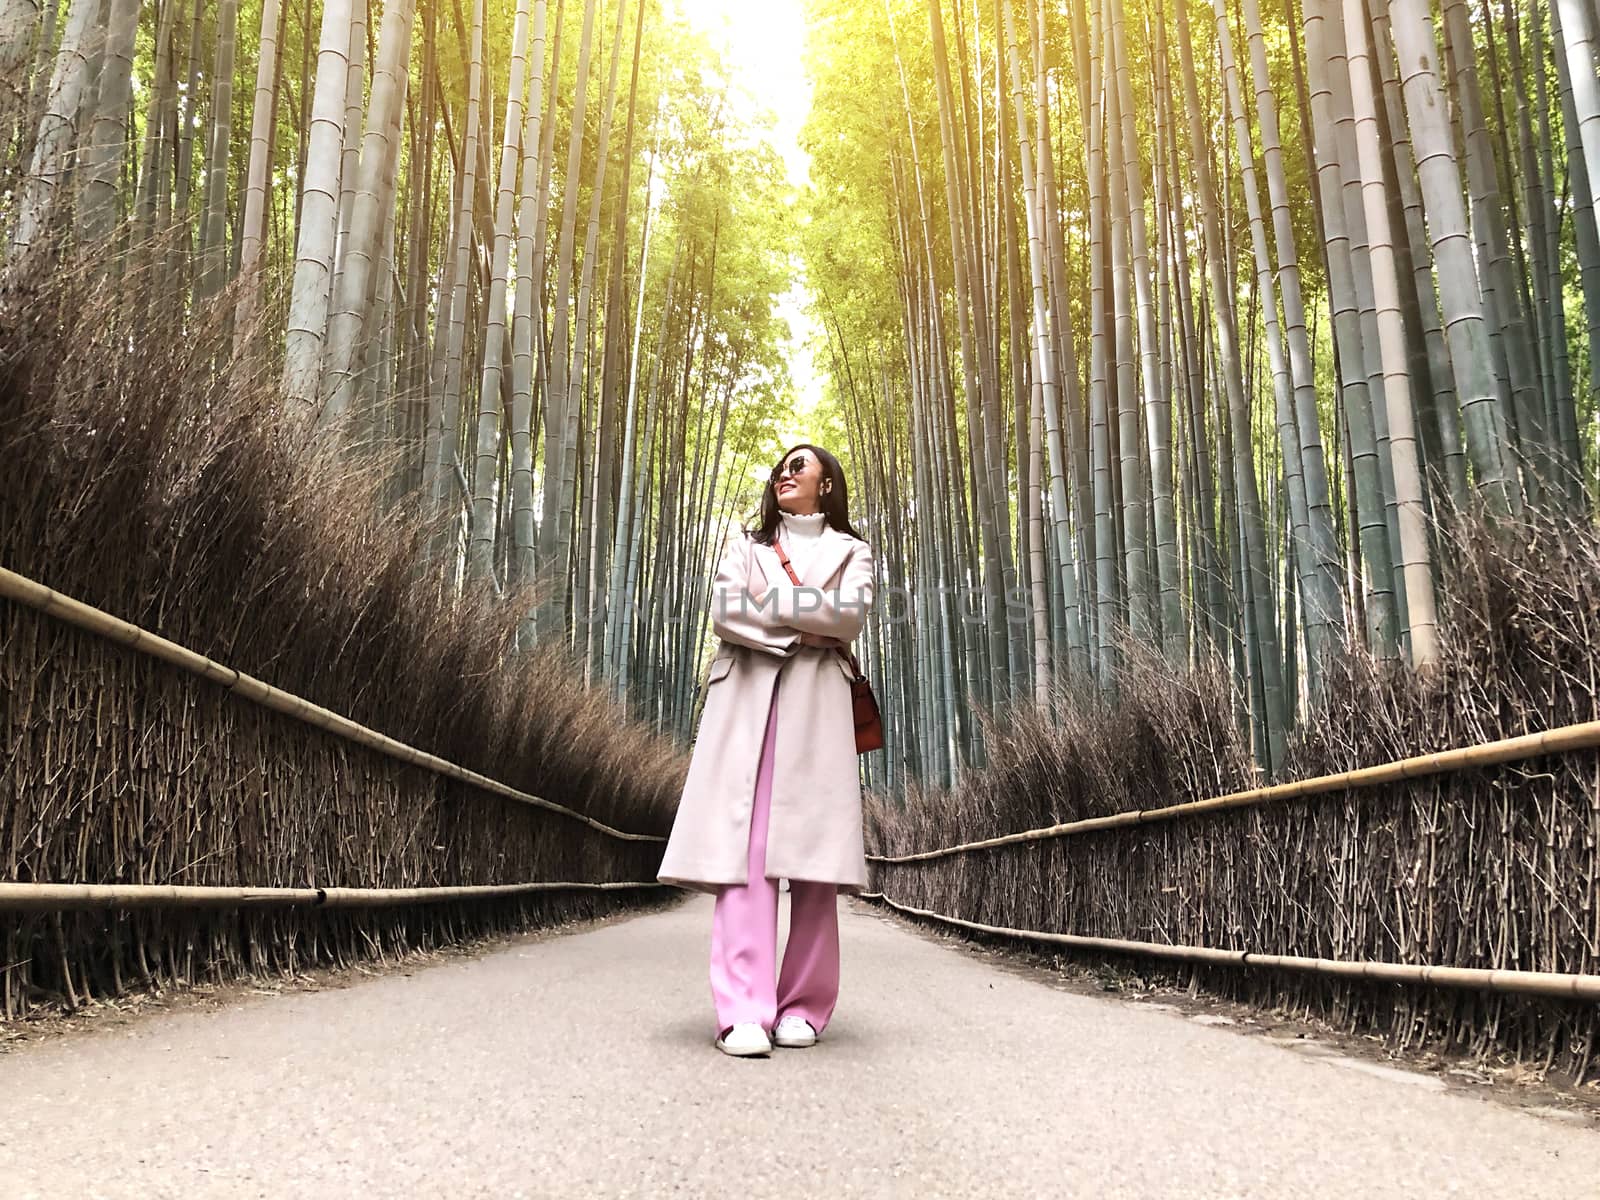  Asian woman traveling at Bamboo Forest in Kyoto, Japan.  by Surasak